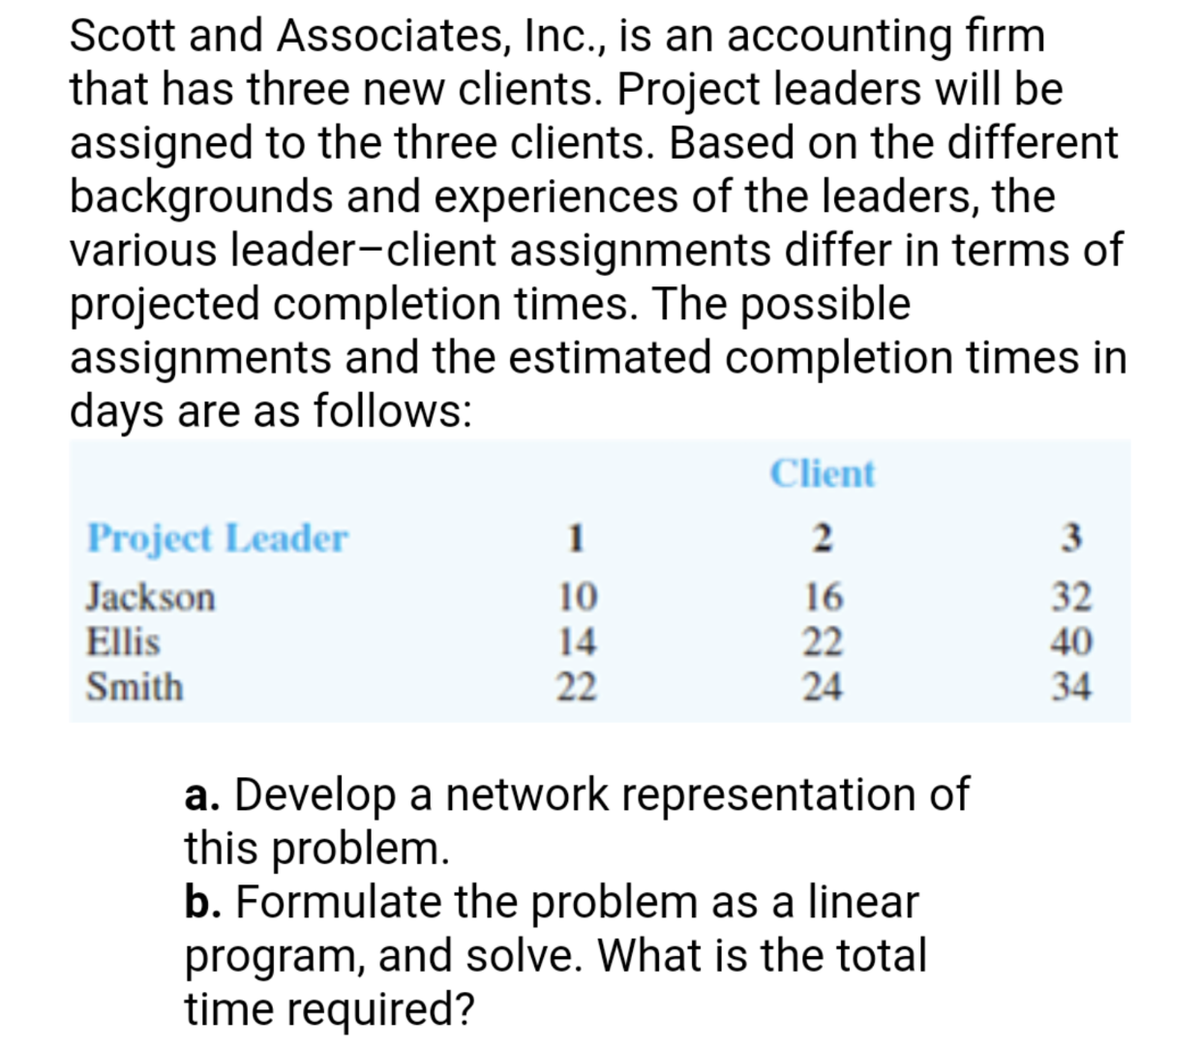 Scott and Associates, Inc., is an accounting firm
that has three new clients. Project leaders will be
assigned to the three clients. Based on the different
backgrounds and experiences of the leaders, the
various leader-client assignments differ in terms of
projected completion times. The possible
assignments and the estimated completion times in
days are as follows:
Client
Project Leader
1
2
3
Jackson
Ellis
Smith
32
40
34
10
16
14
22
22
24
a. Develop a network representation of
this problem.
b. Formulate the problem as a linear
program, and solve. What is the total
time required?
